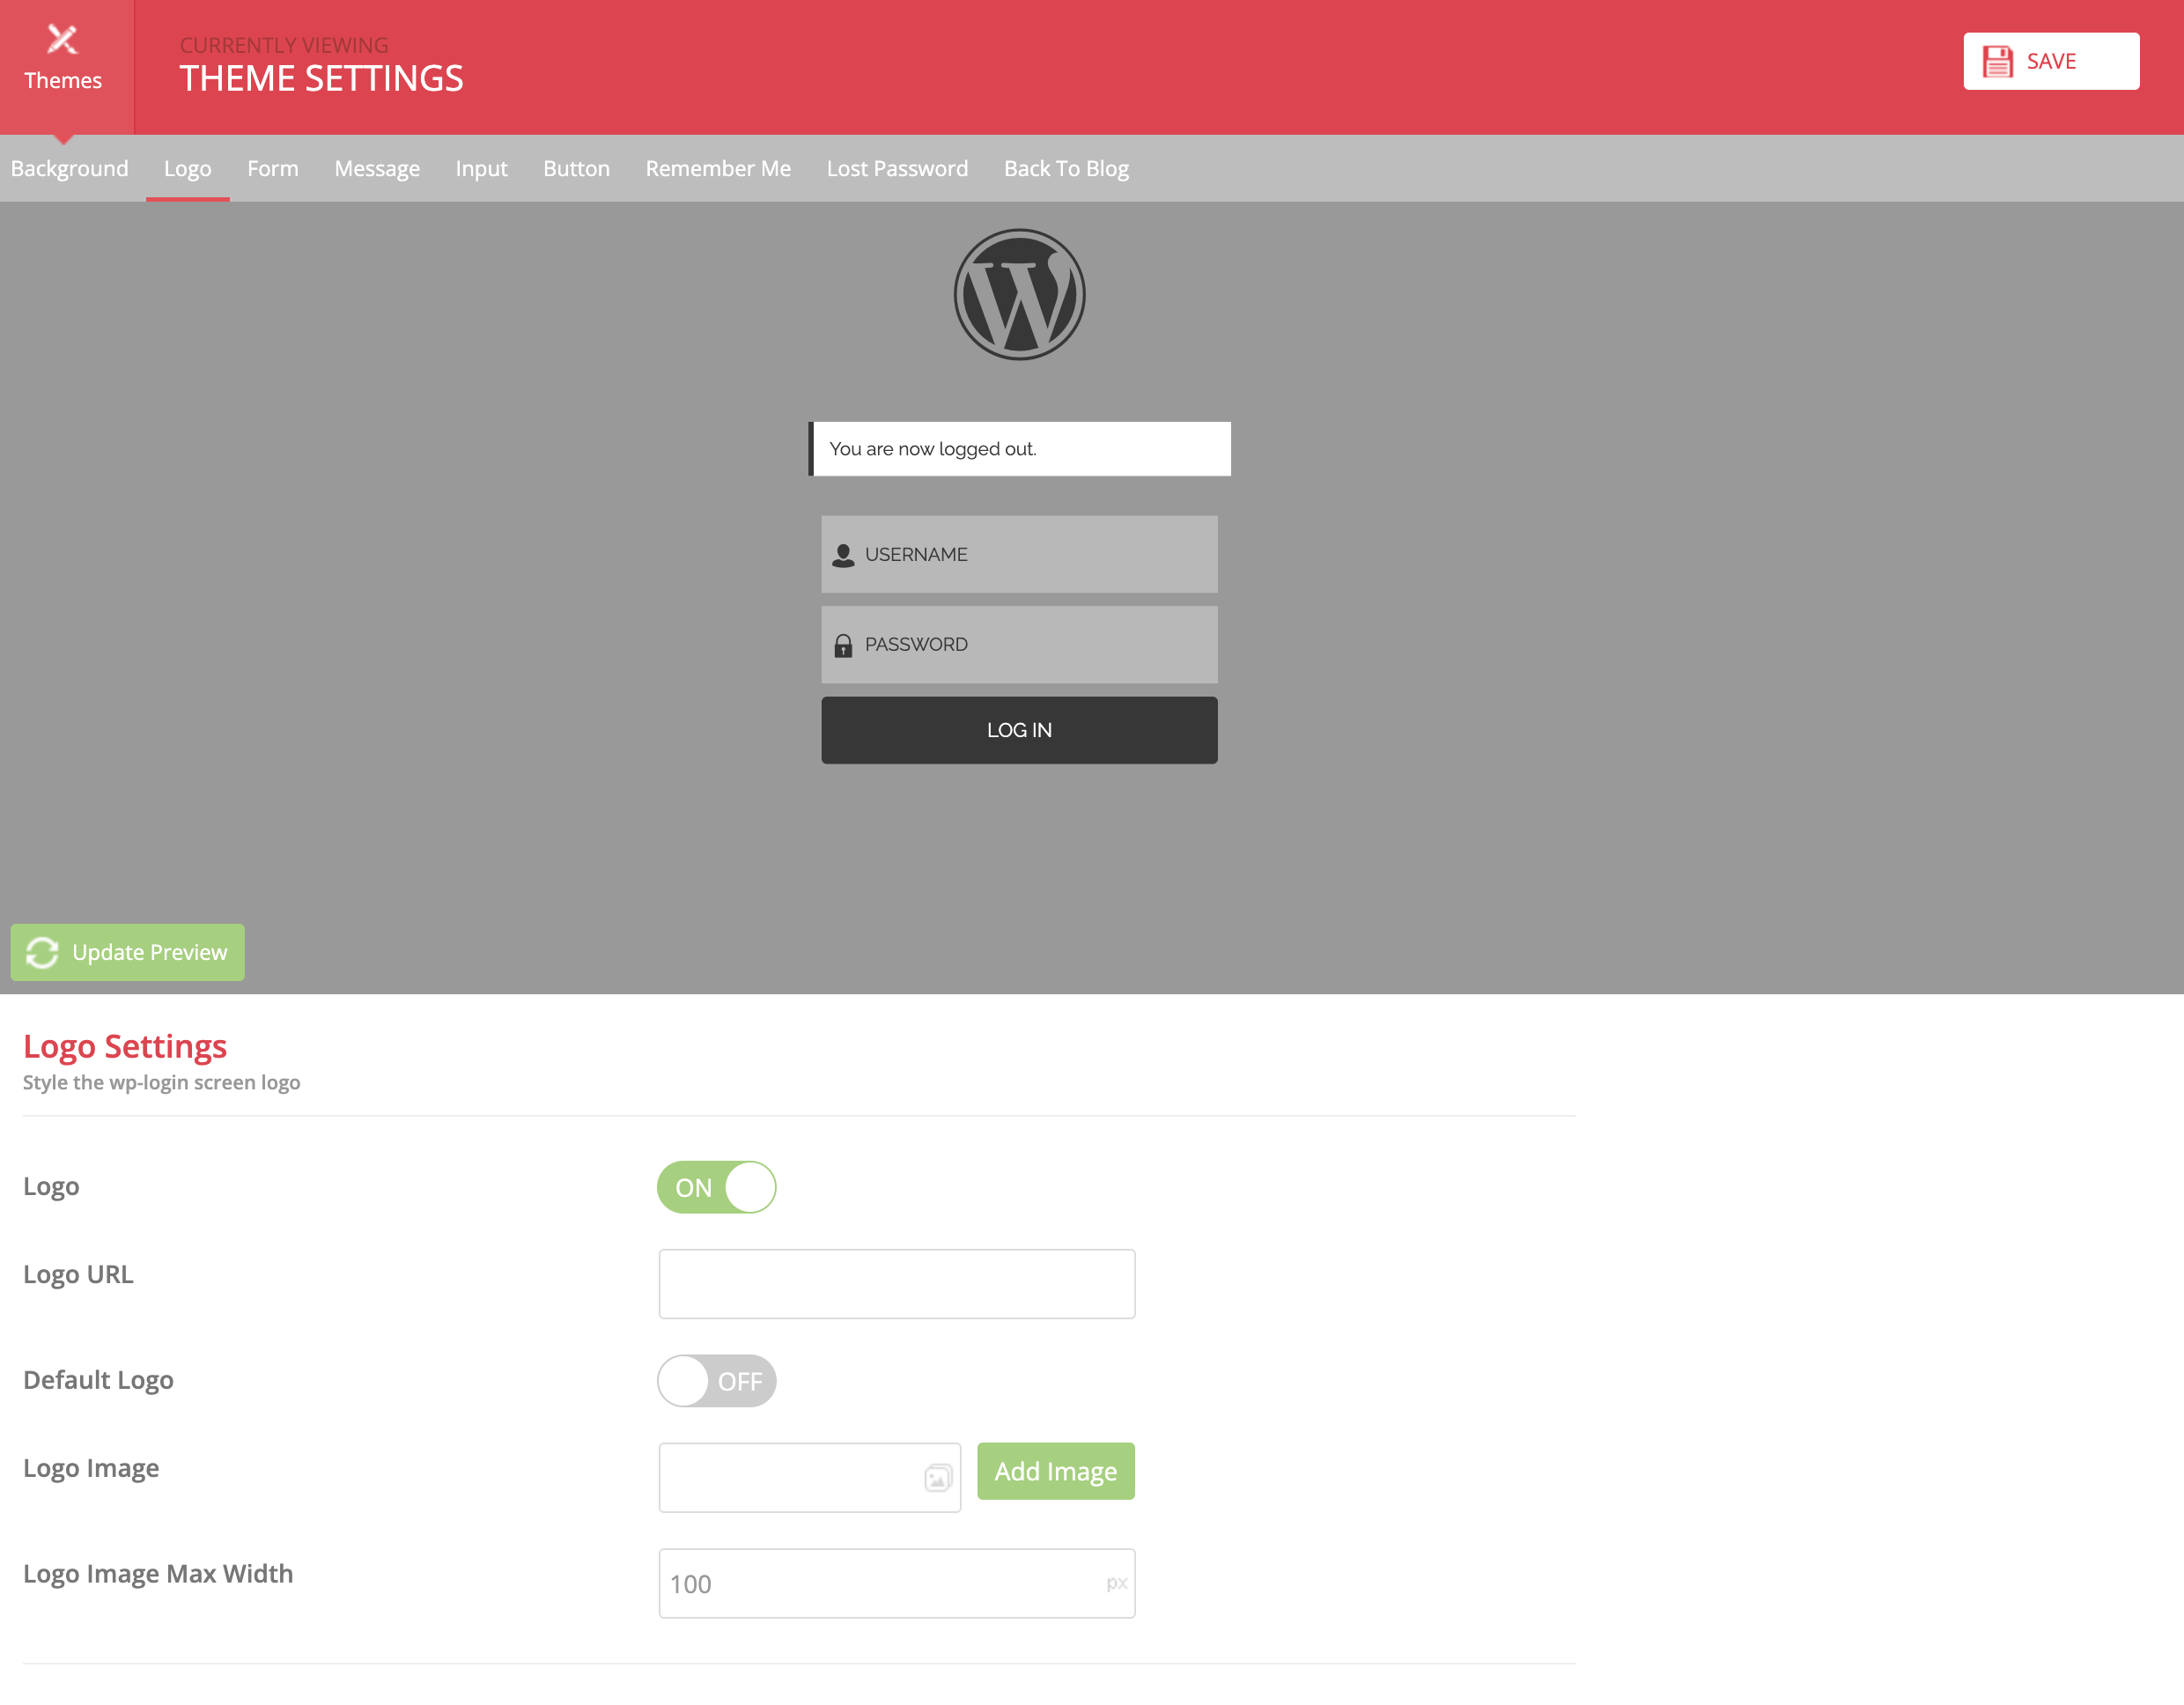 screencapture-localhost-8030-wp-admin-admin-php-2022-07-25-21_46_36.png